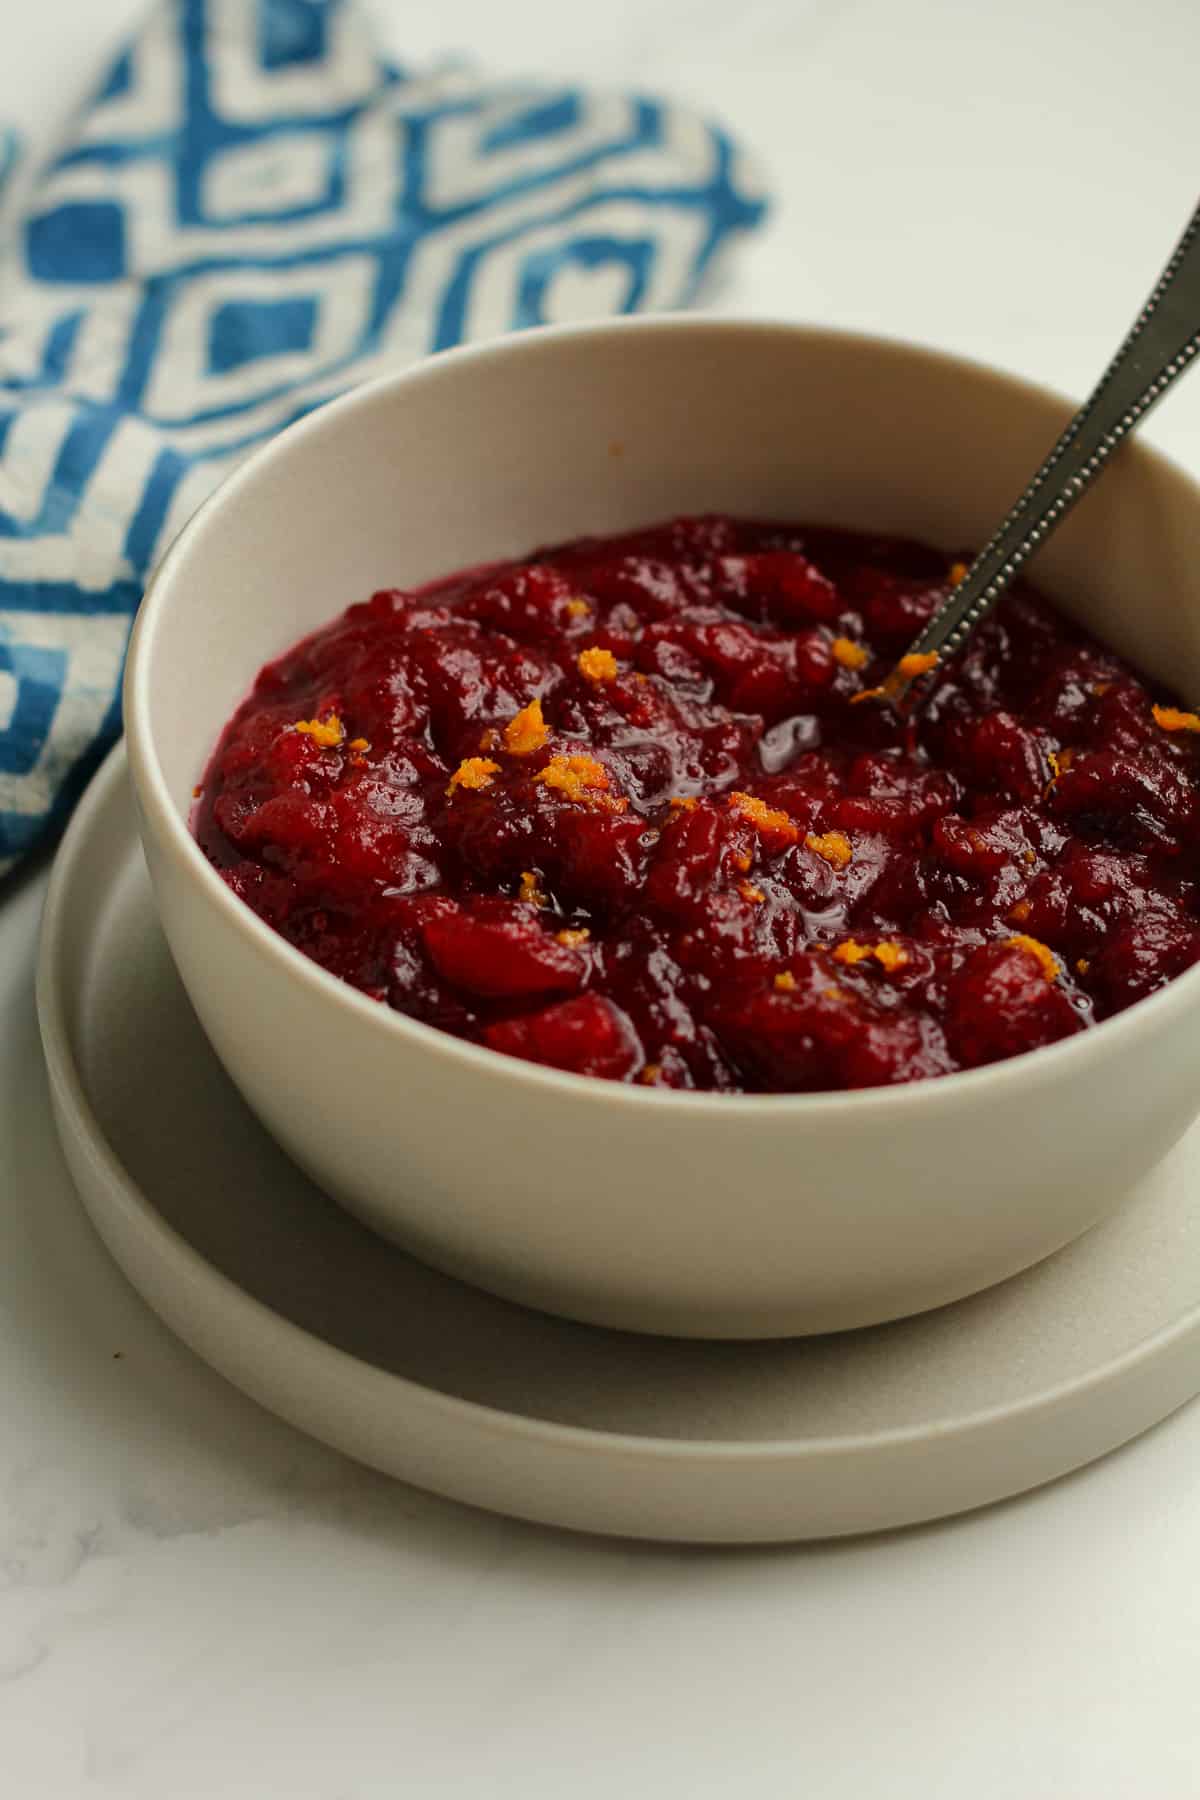 Side shot of a bowl of the cranberry sauce with orange zest on top.